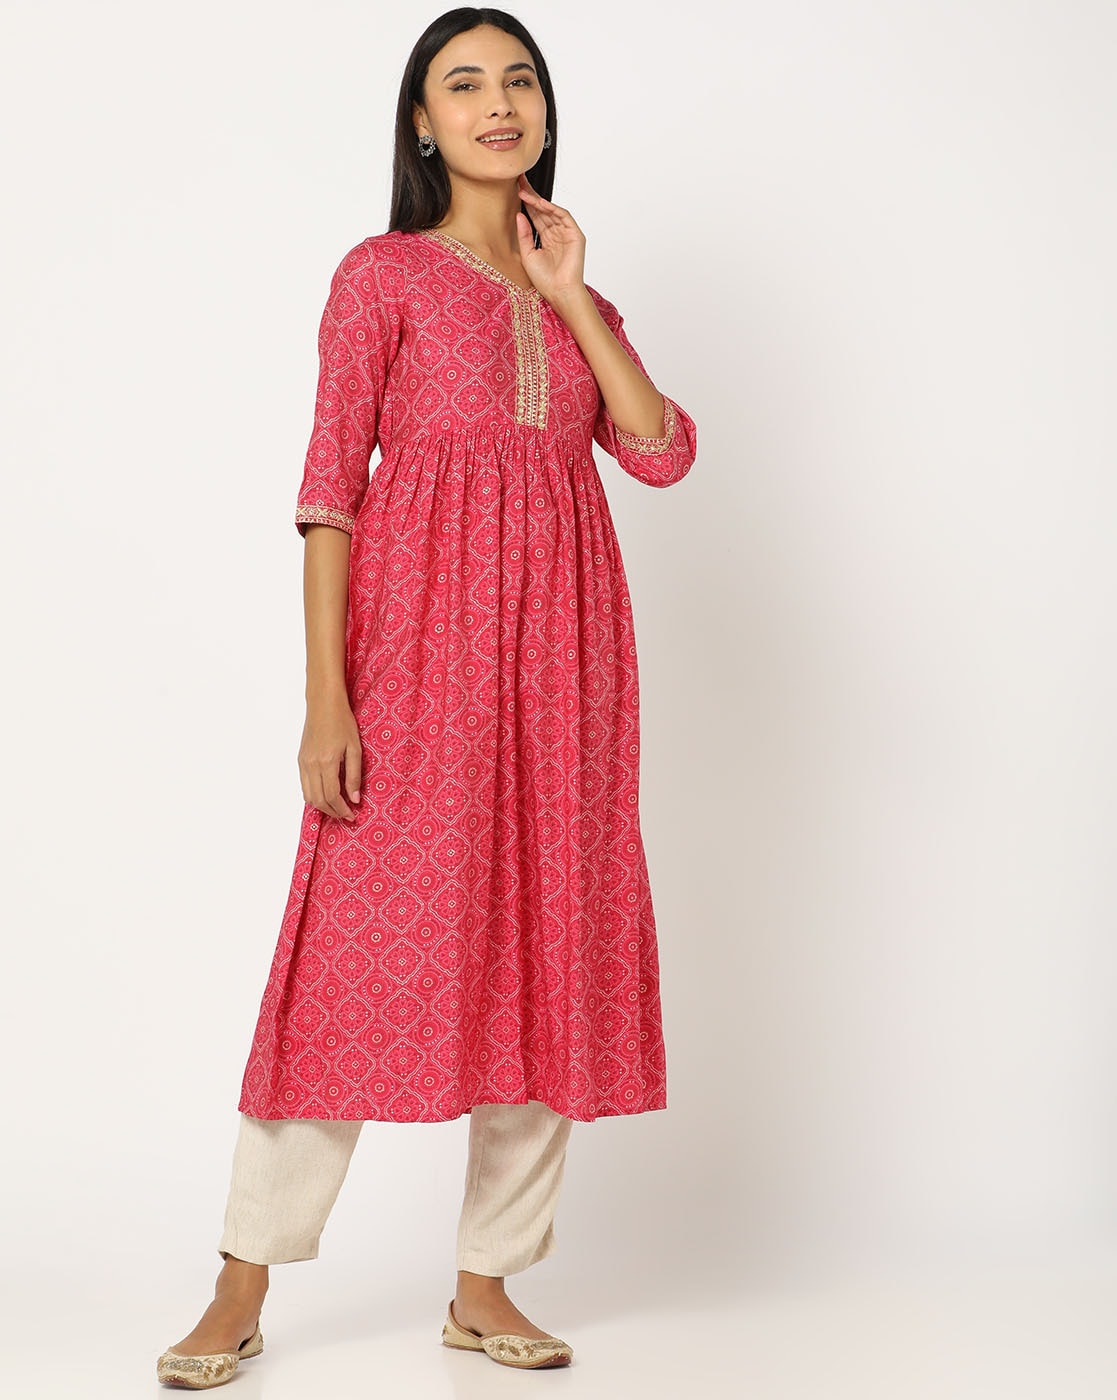 AVAASA MIX N MATCH By Reliance Trends Women Kurtis Upto 70% Discount Starts  From Rs.120